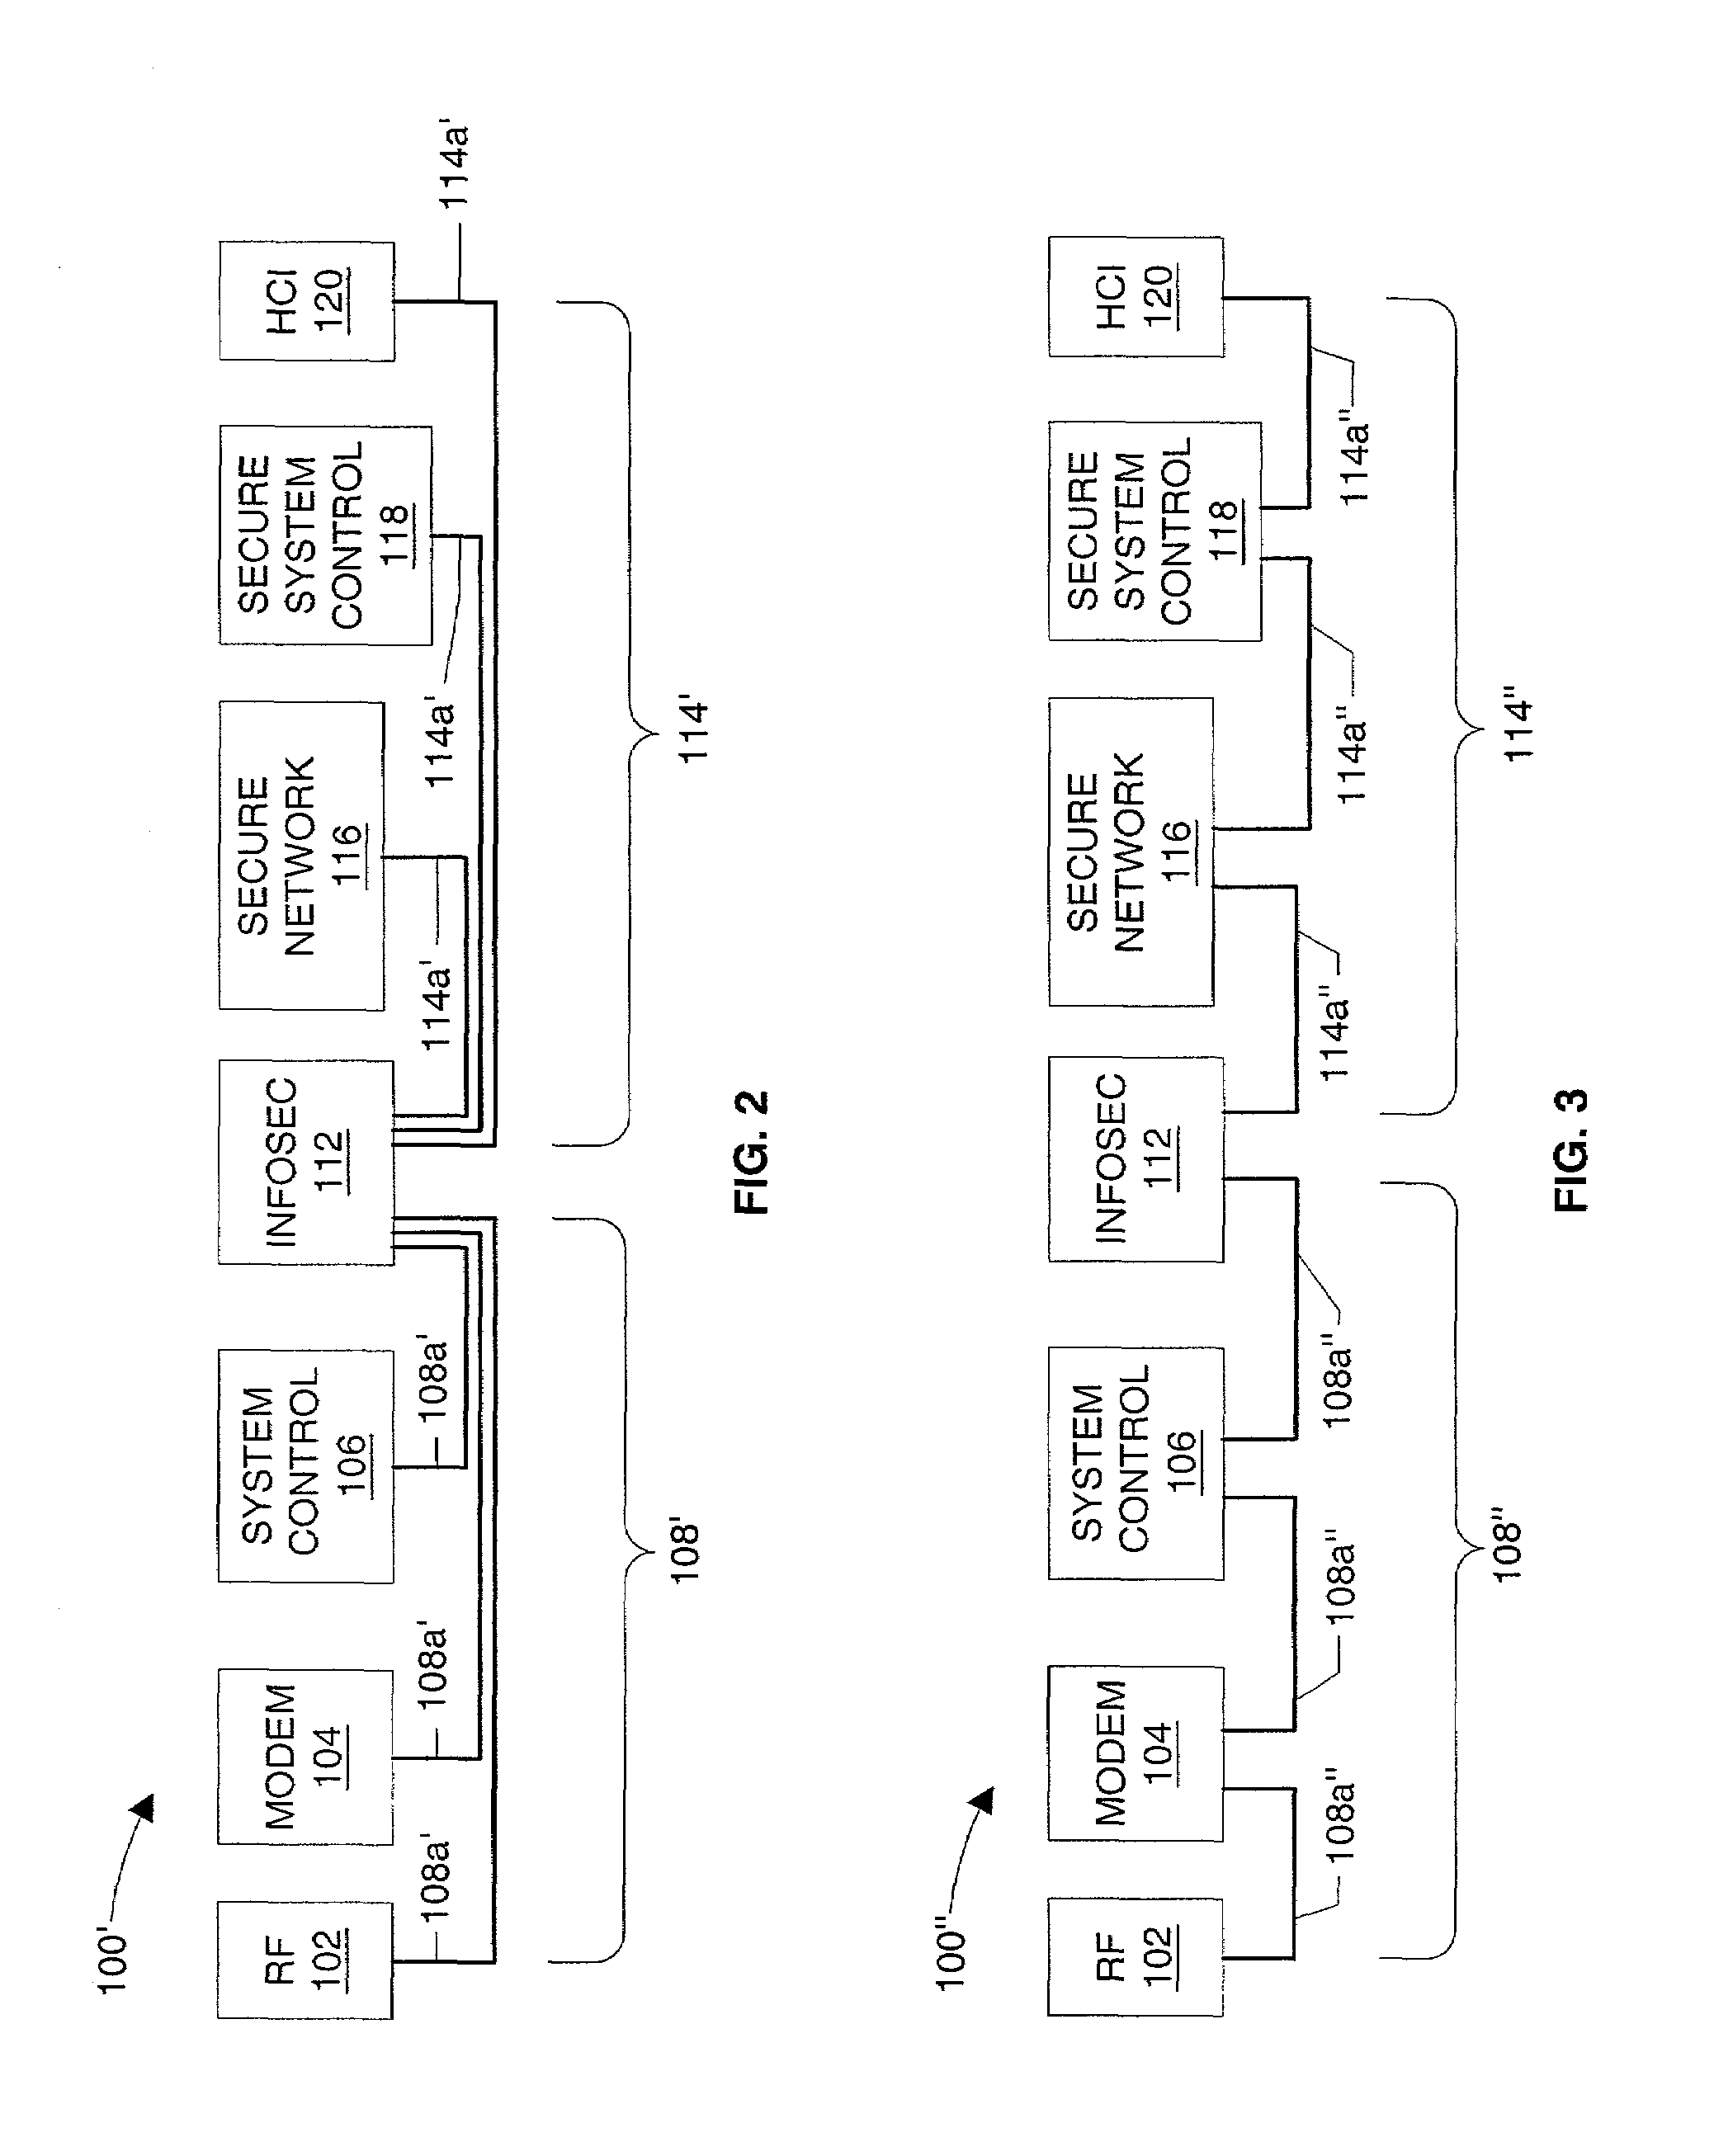 Radio with internal packet network